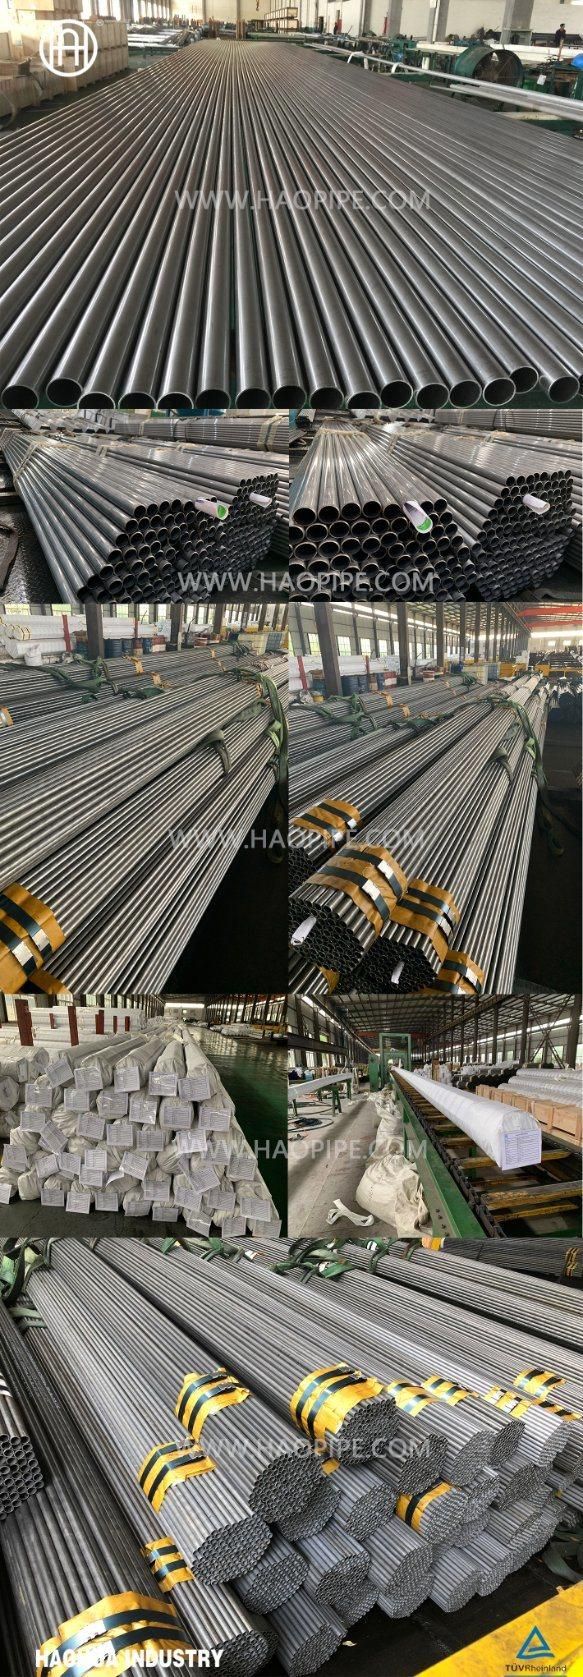 Seamless Carbon Steel Tube ASTM A179 for Boiler/Machining/Heat Exchanger